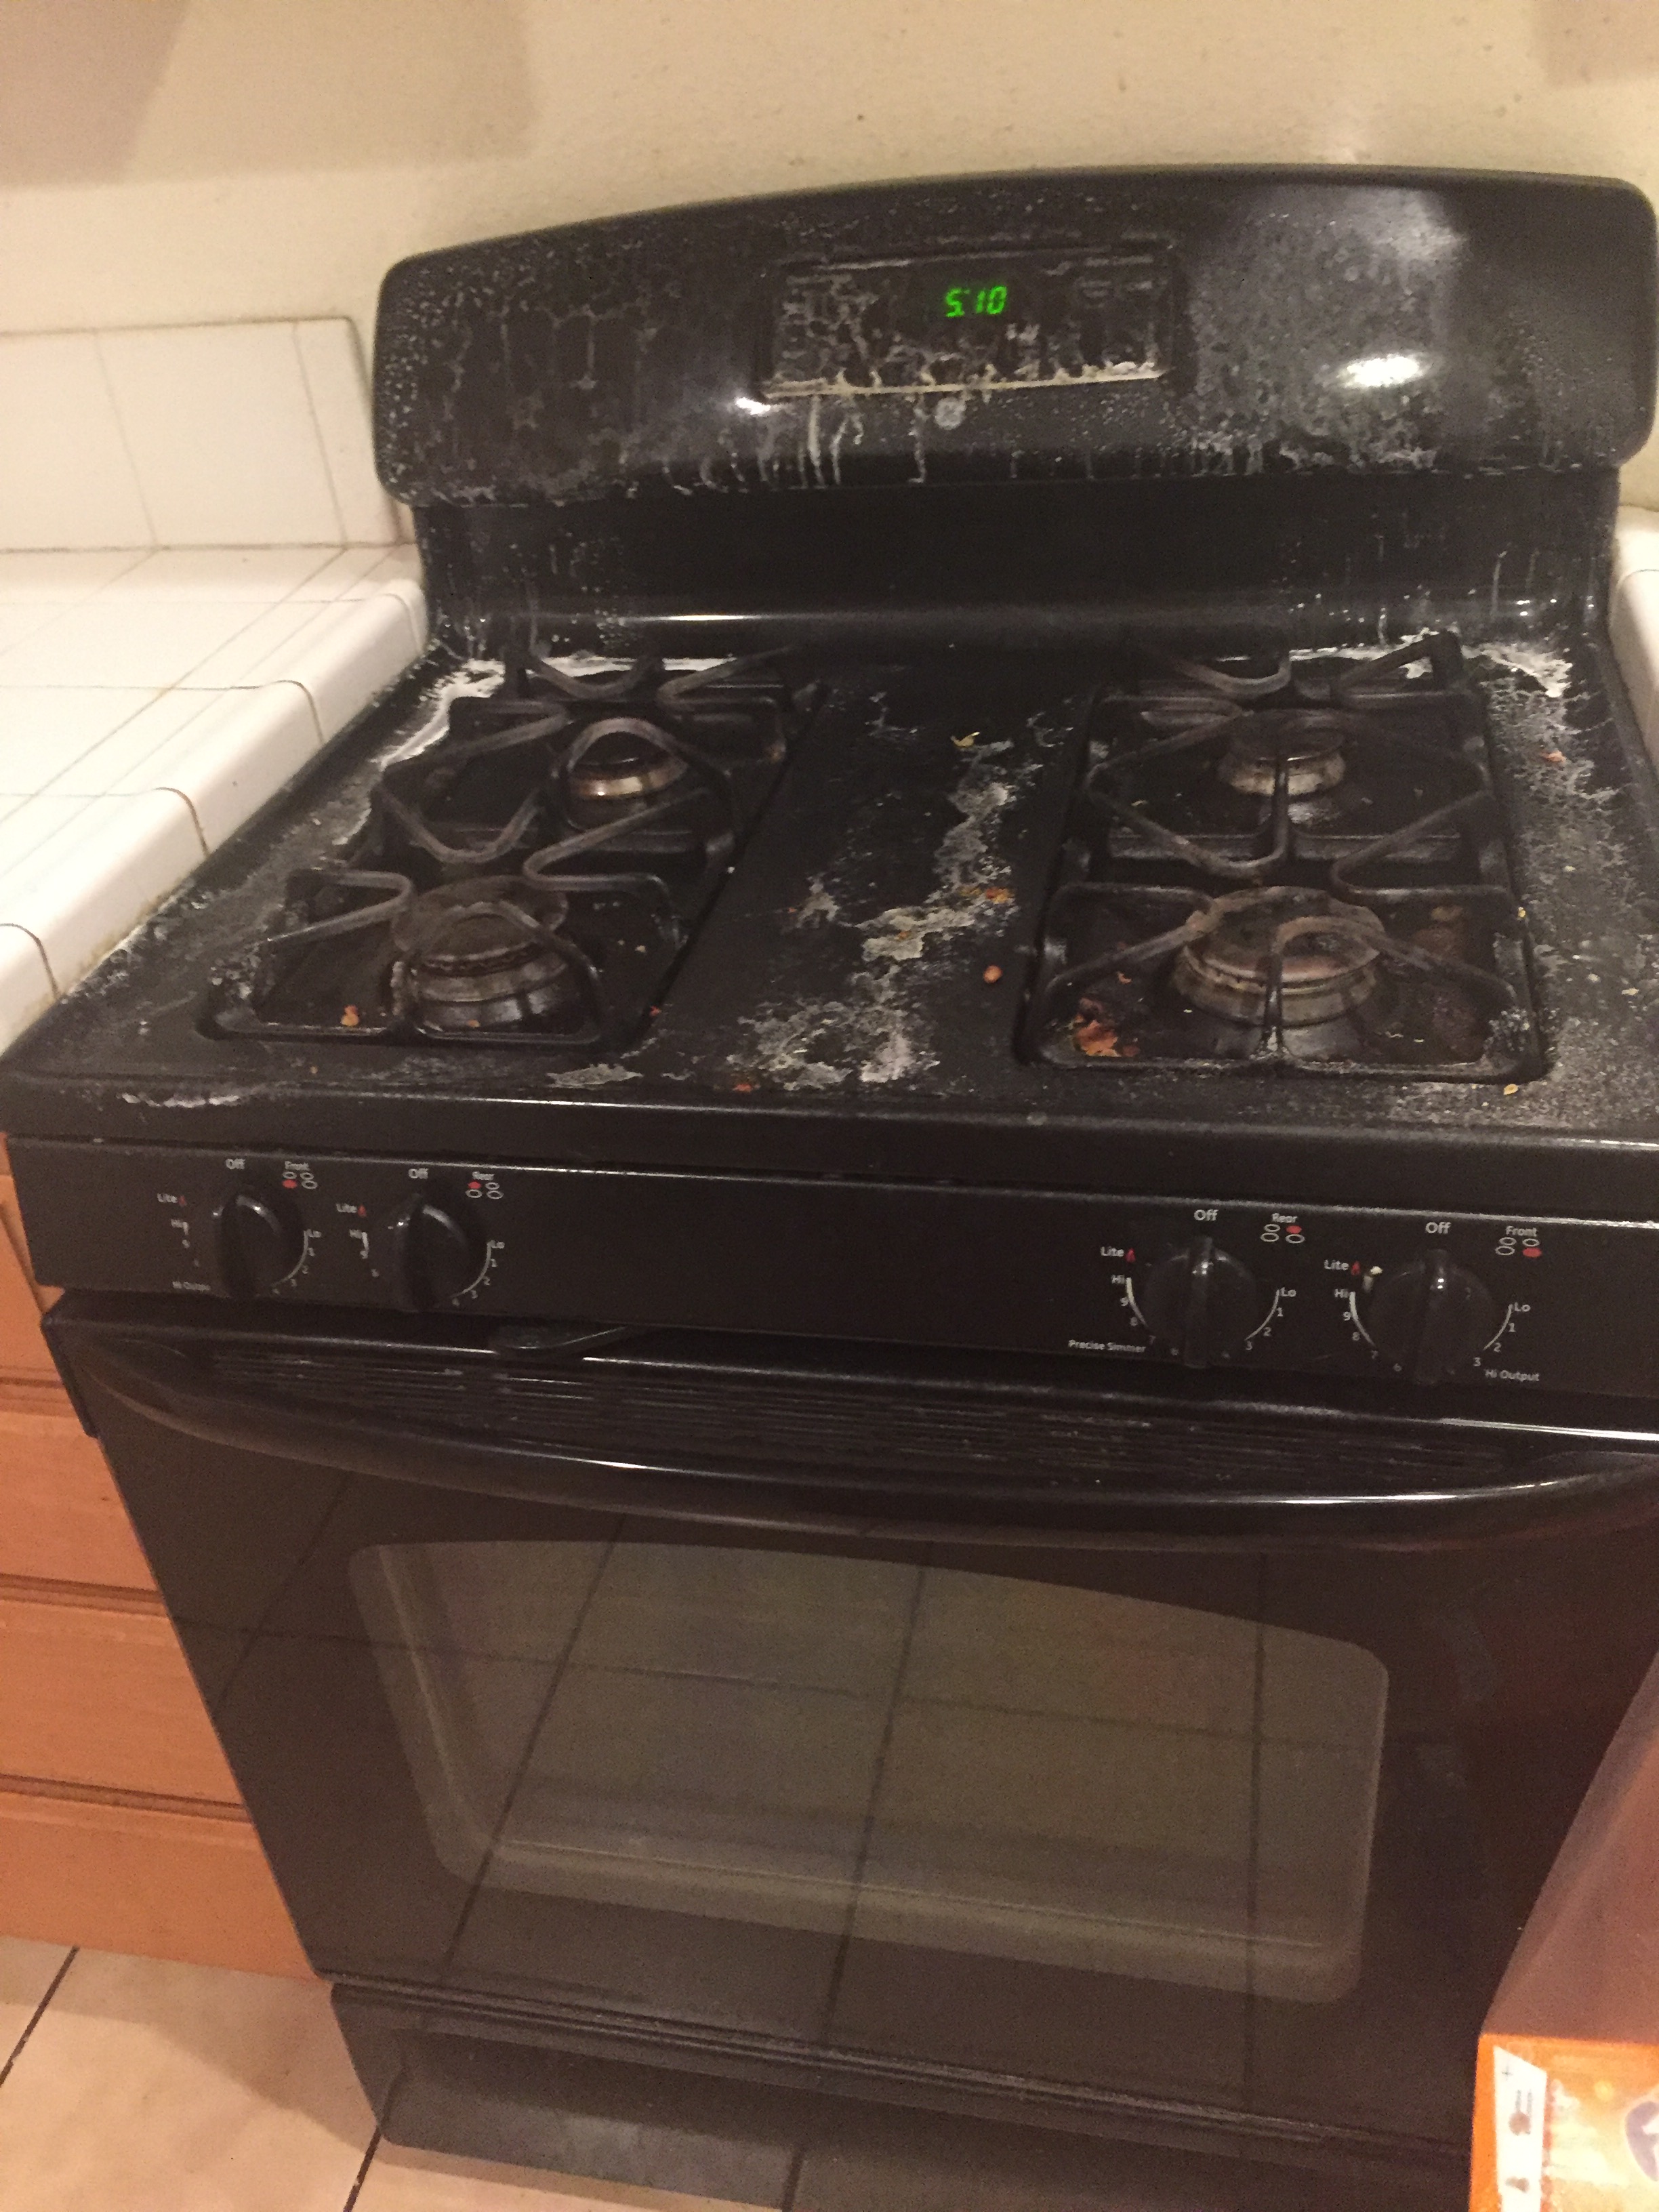 Left my gas stove dirty